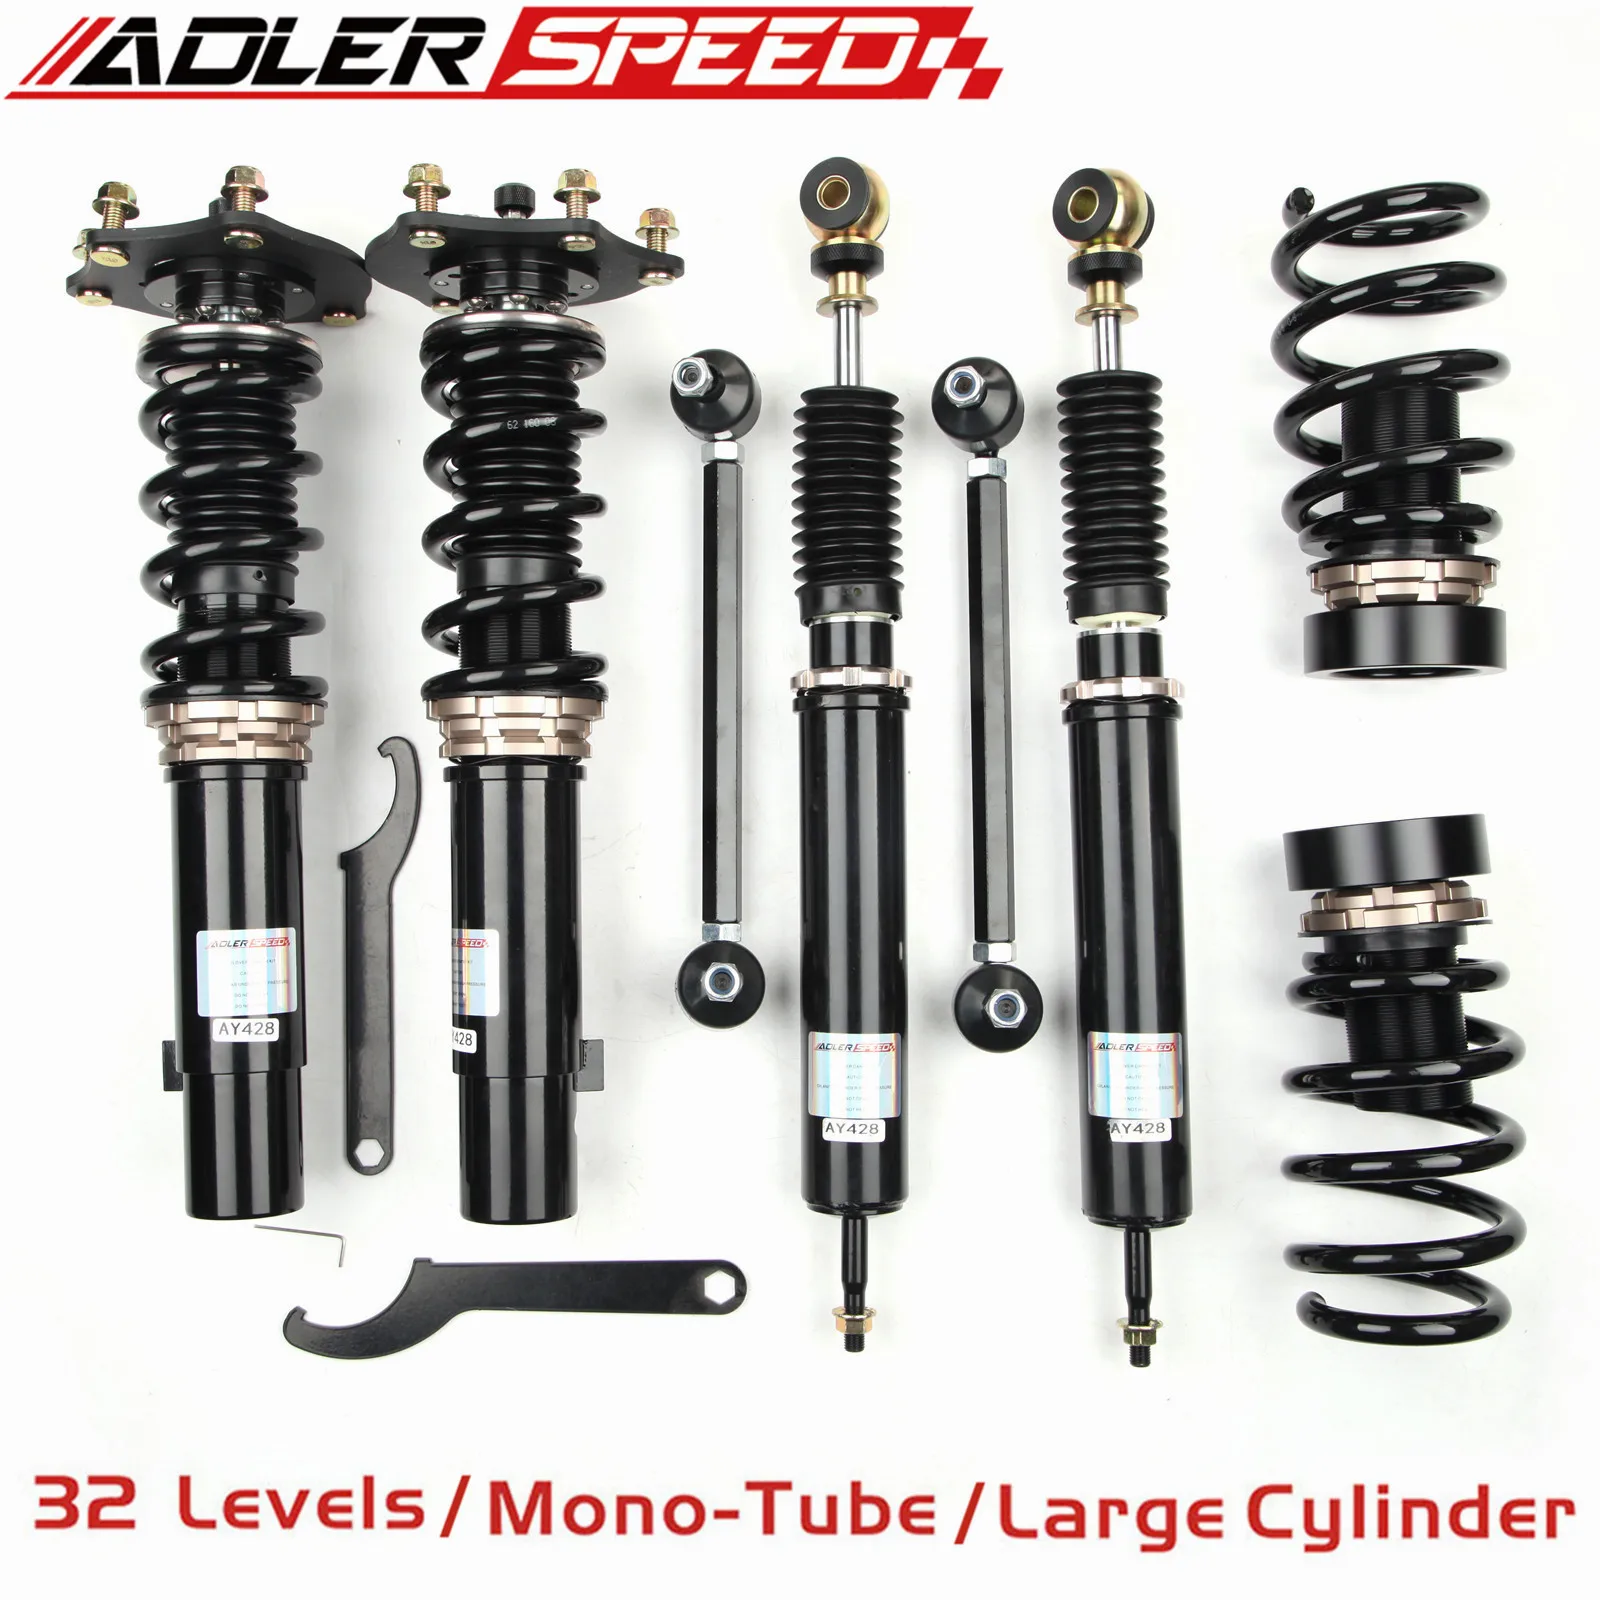 

ADLERSPEED 32 Level Adjustable Coilover Shock Kit For 18-21 Honda Accord W/O ADS